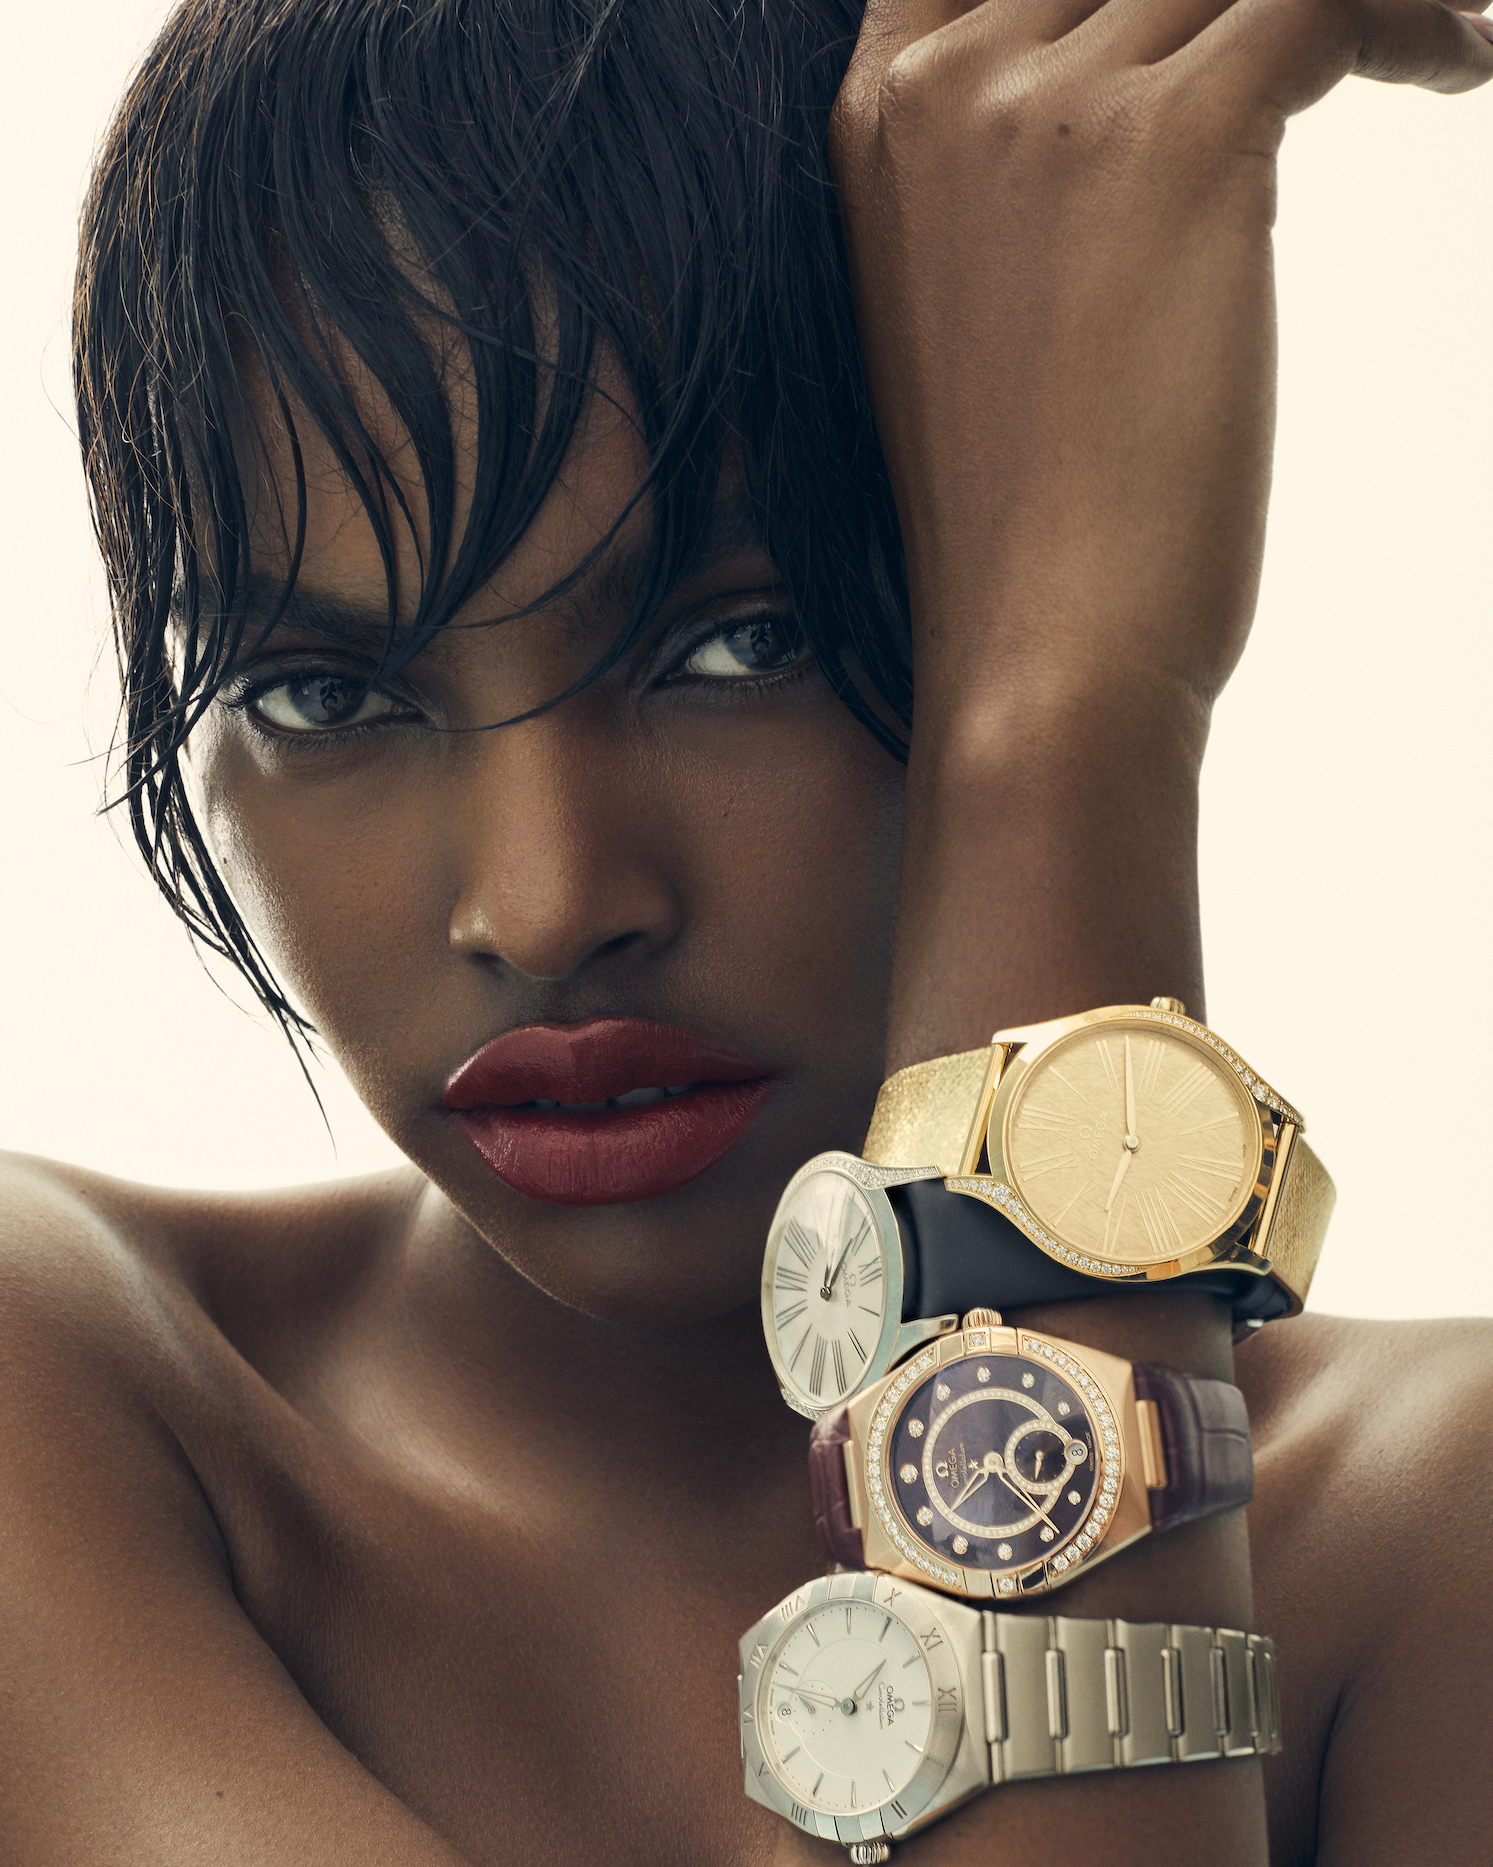  Amilna wears watches OMEGA Constellation Small Seconds (steel on steel) Constellation Small Seconds (Sedna™ gold on leather strap) De Ville Trésor (Moonshine™ gold on Moonshine™ gold) De Ville Trésor (steel on fabric strap) ($5,000-$24,300 available at OMEGA boutiques nationwide)